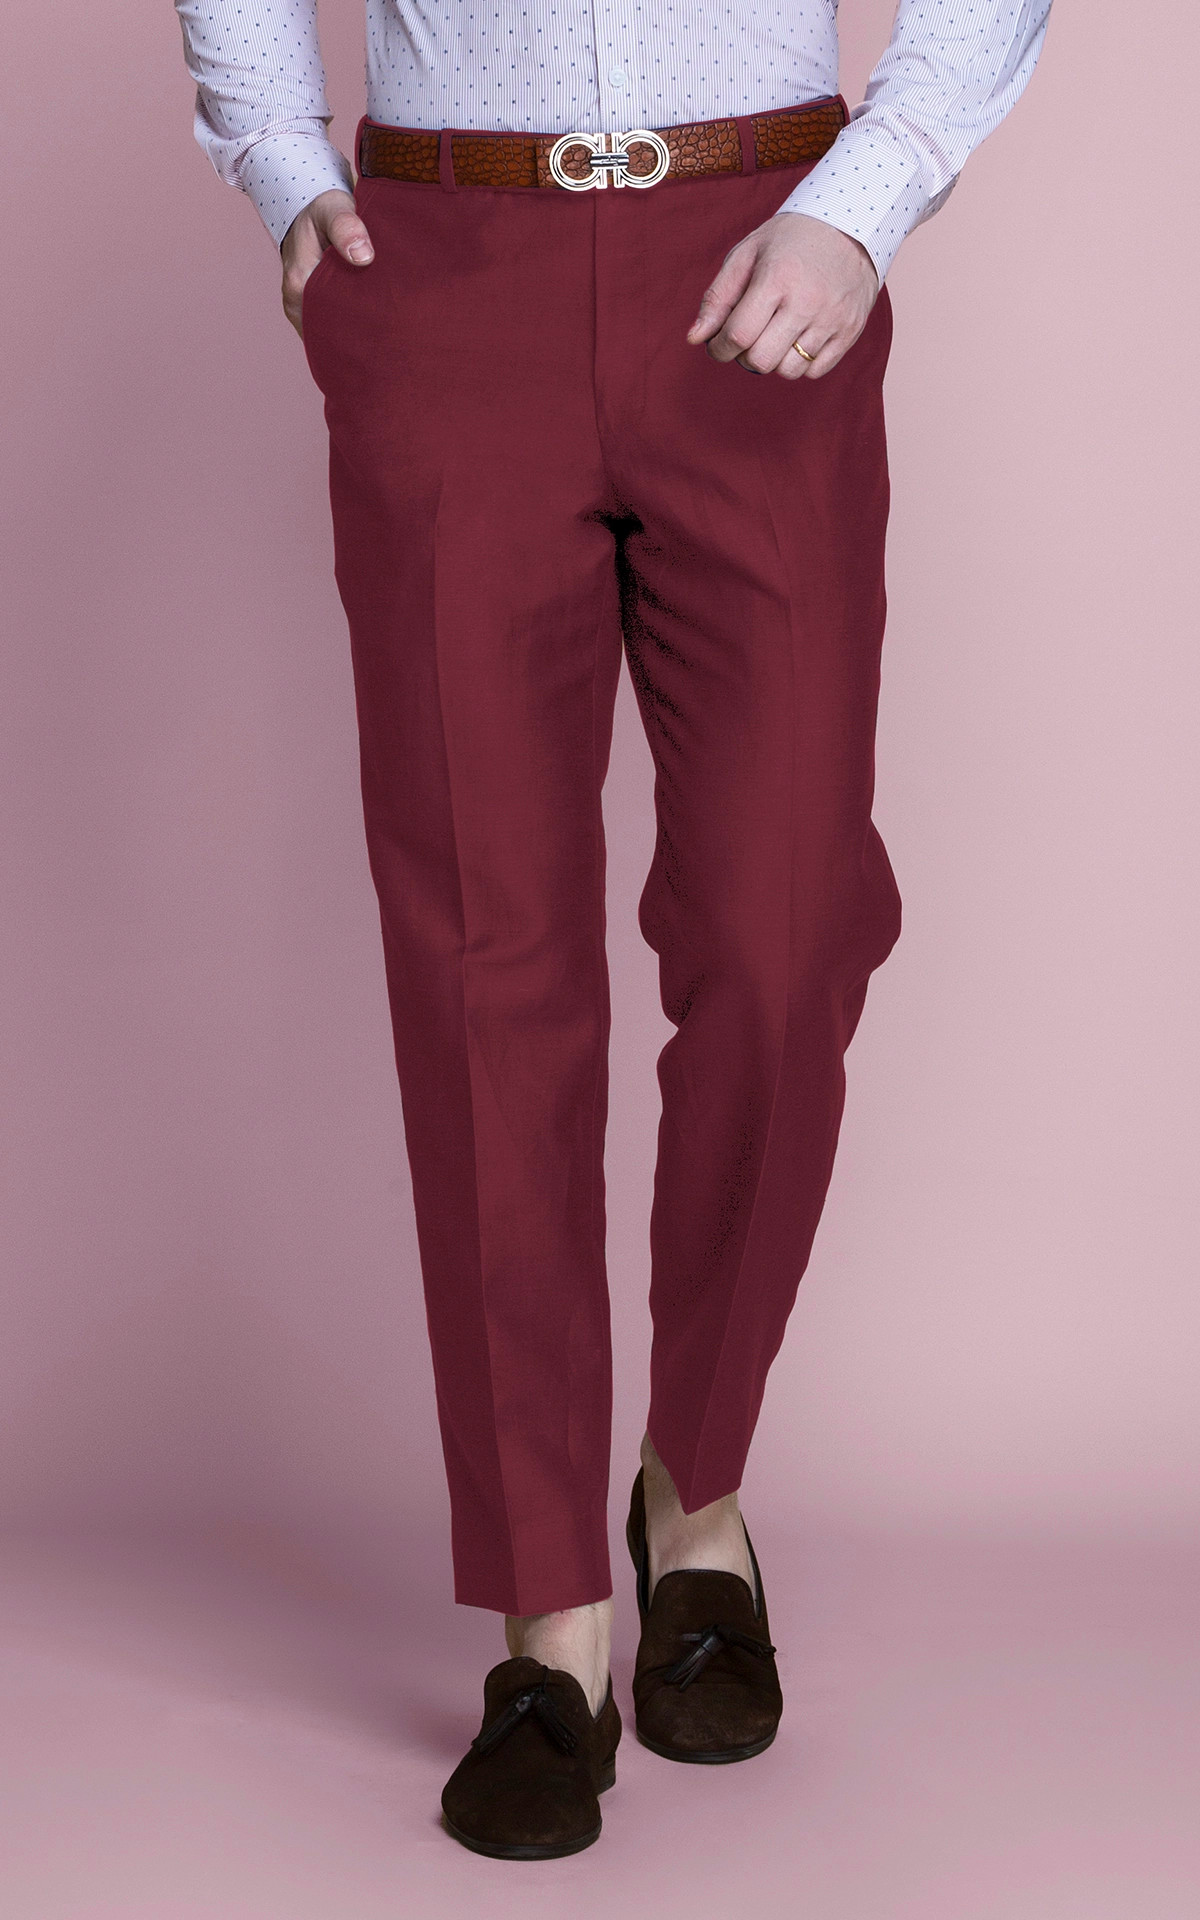 Women's fashion burgundy pants and blue shirt | Luvtolook | Virtual Styling  | Fall outfits for work, Classy work outfits, Stylish fall outfits